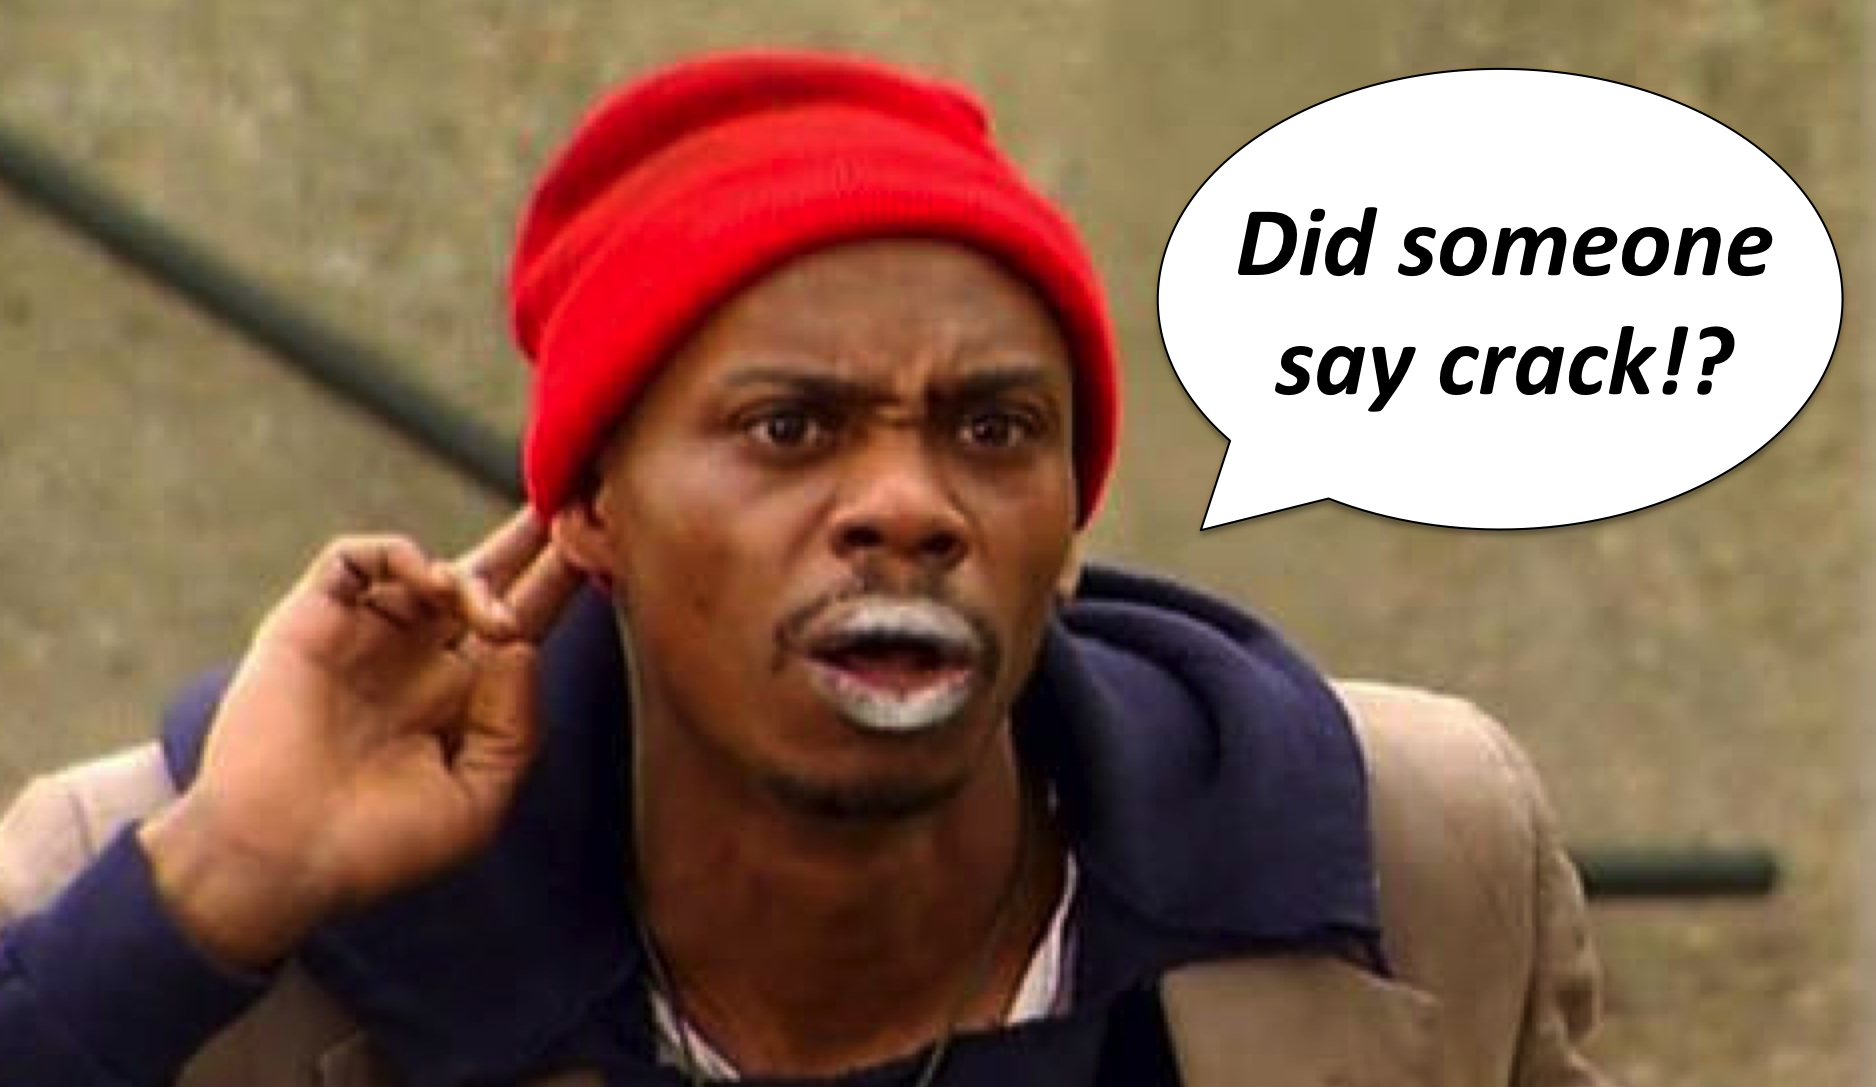 Tyrone Biggums. Dave Chappelle meme. Dave Chappelle Tyrone Biggums Costume. Cant hear